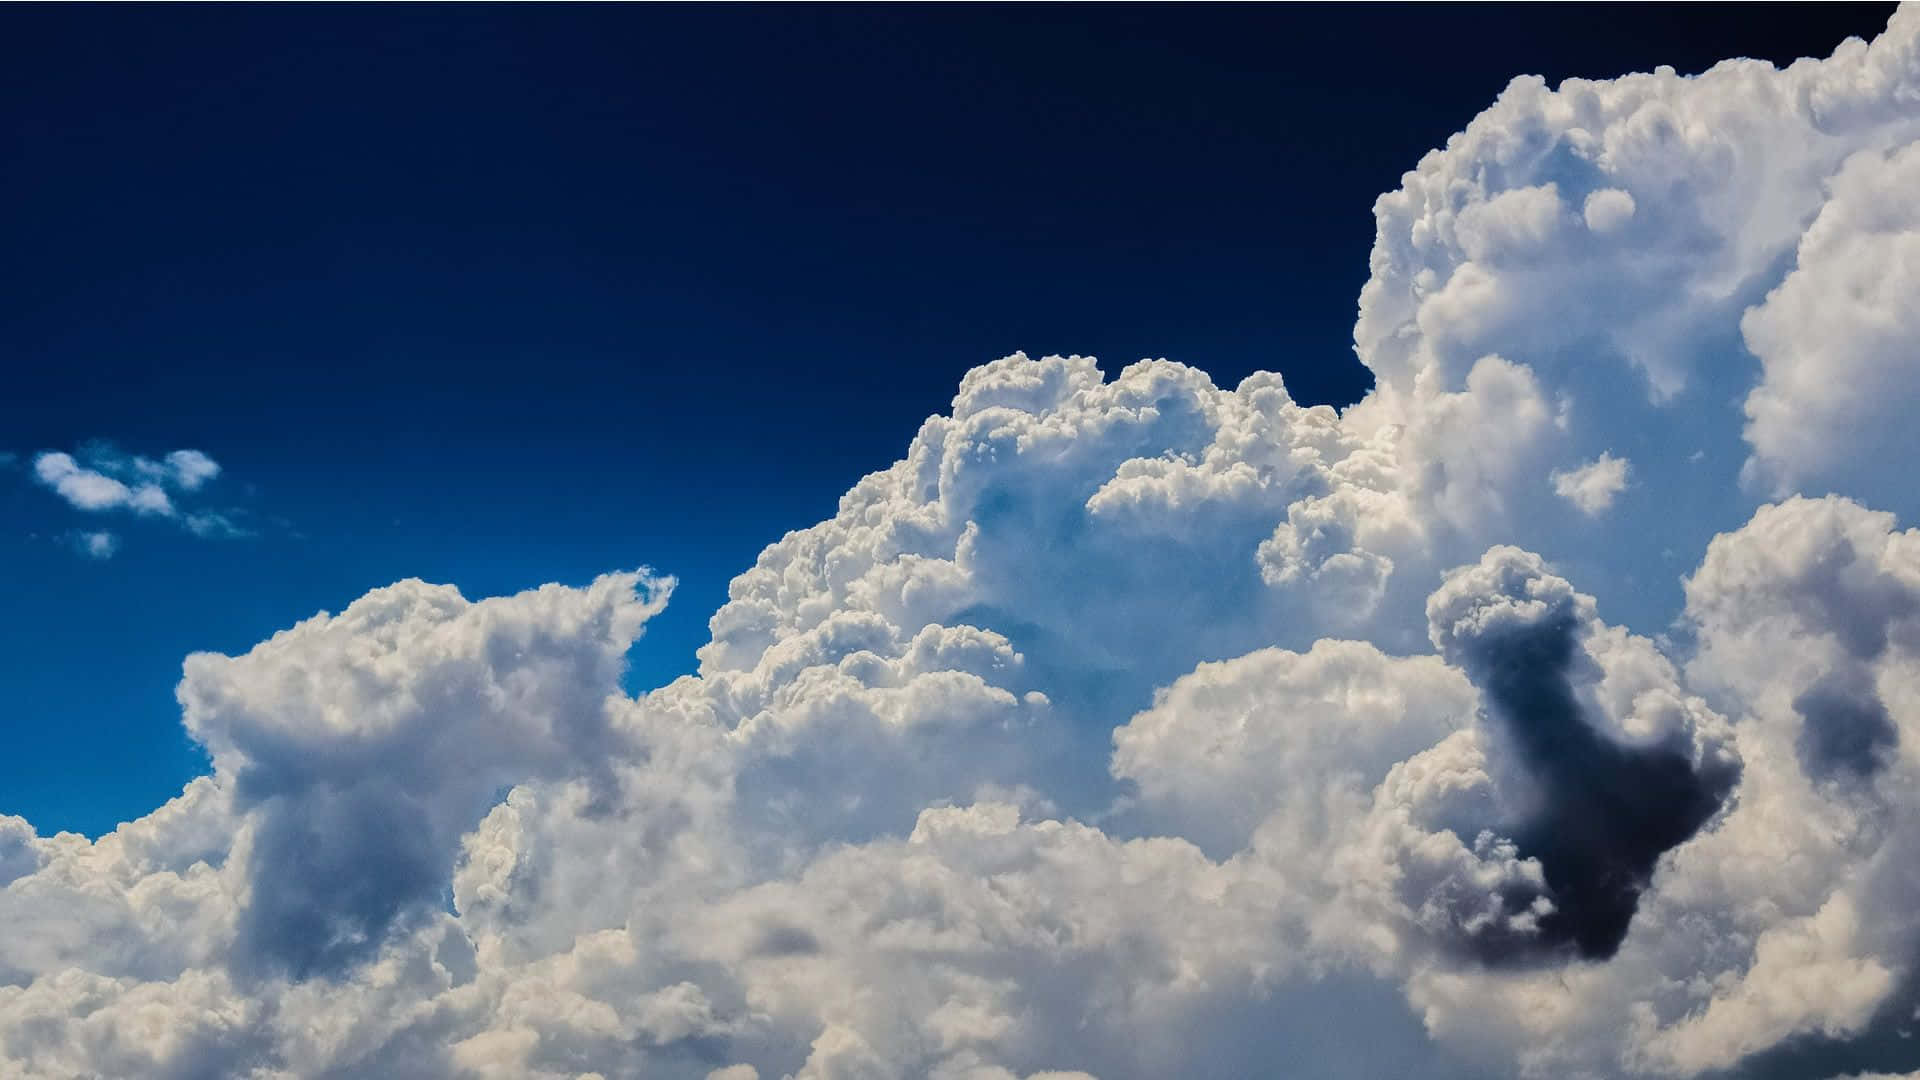 The Majestic White Clouds of Nature